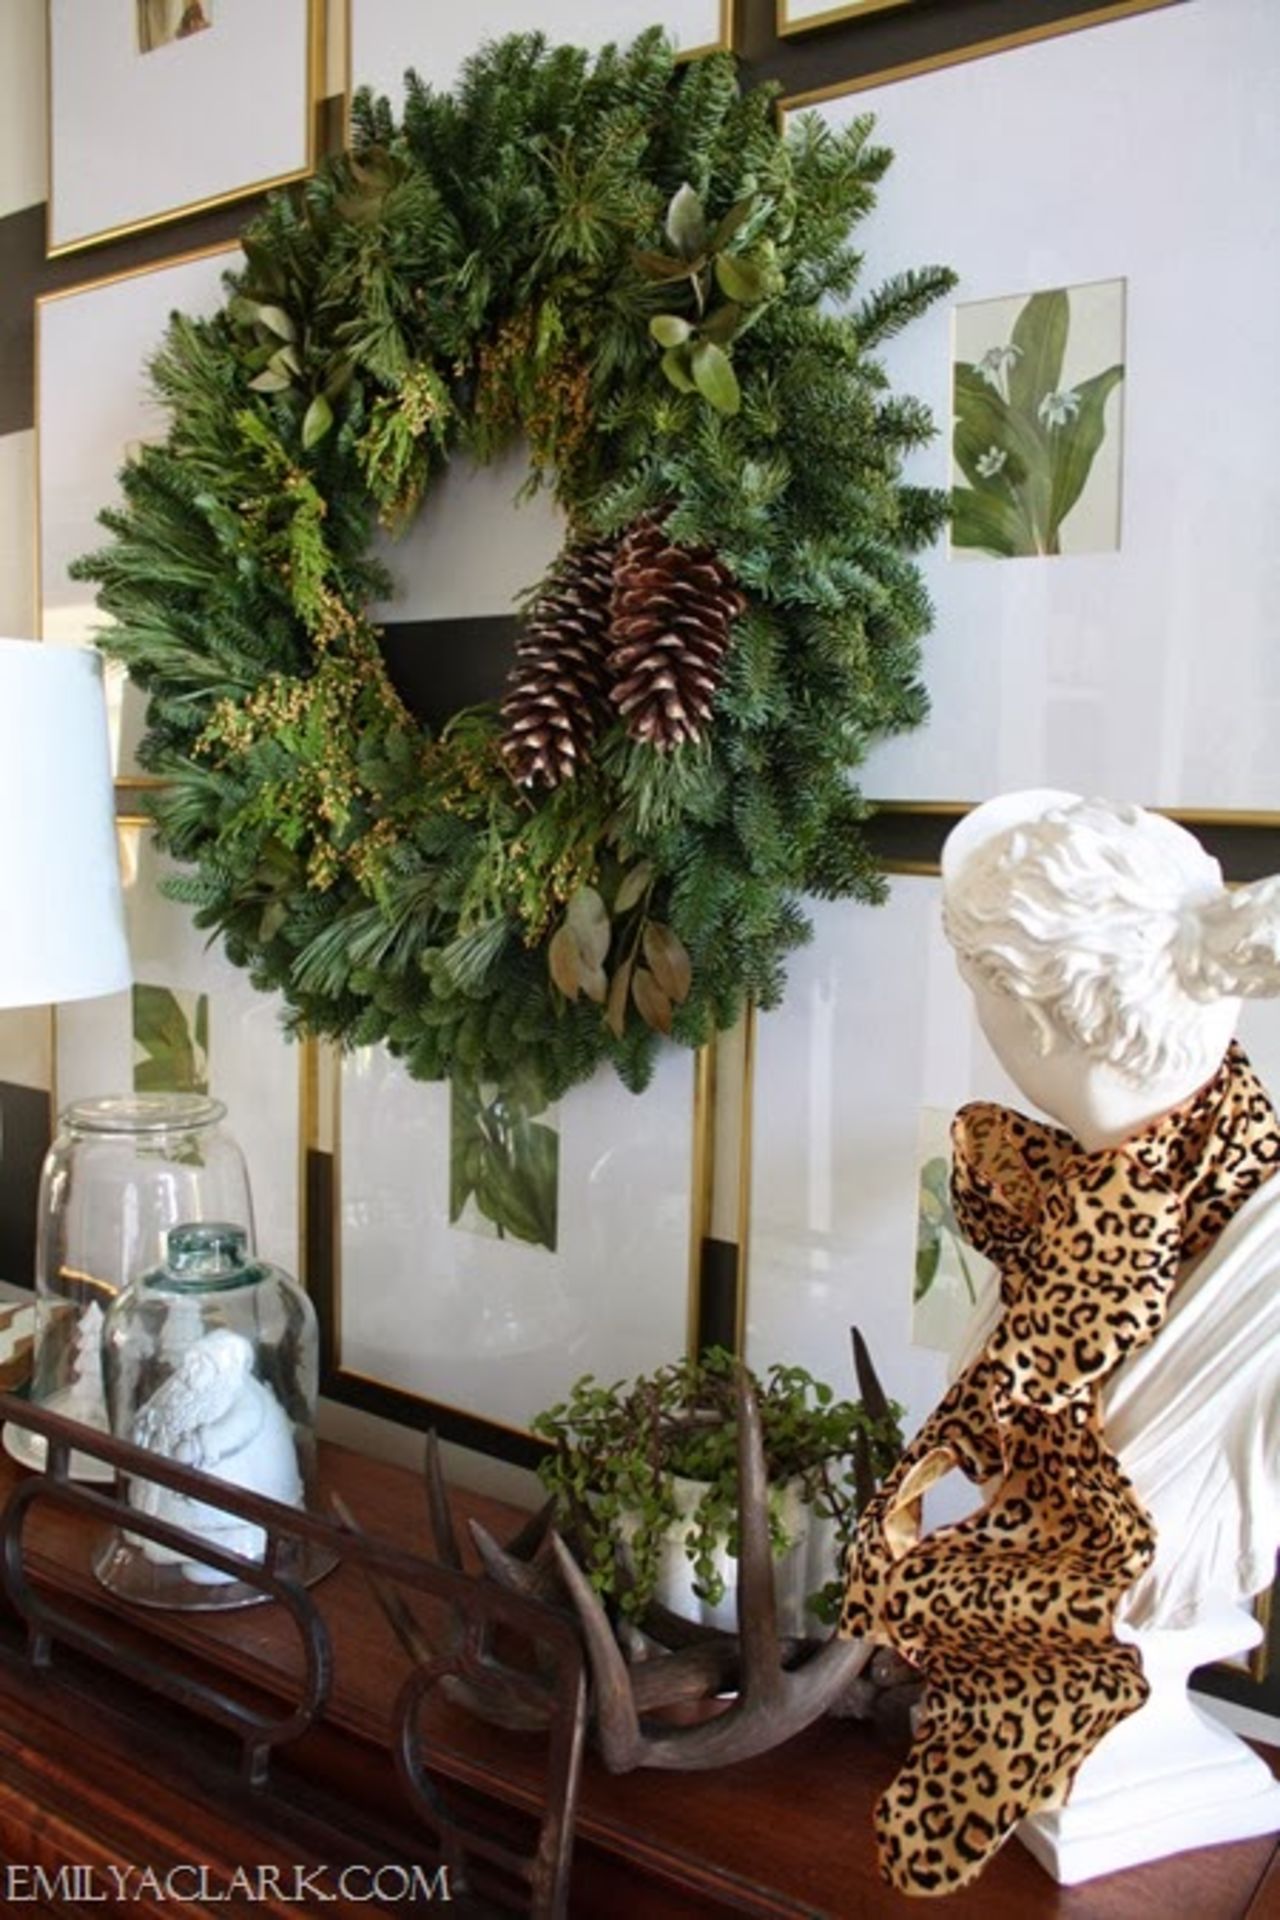 A simple wreath with pine cones and some scattered shed antlers lend a wintery air to Clark's entryway.